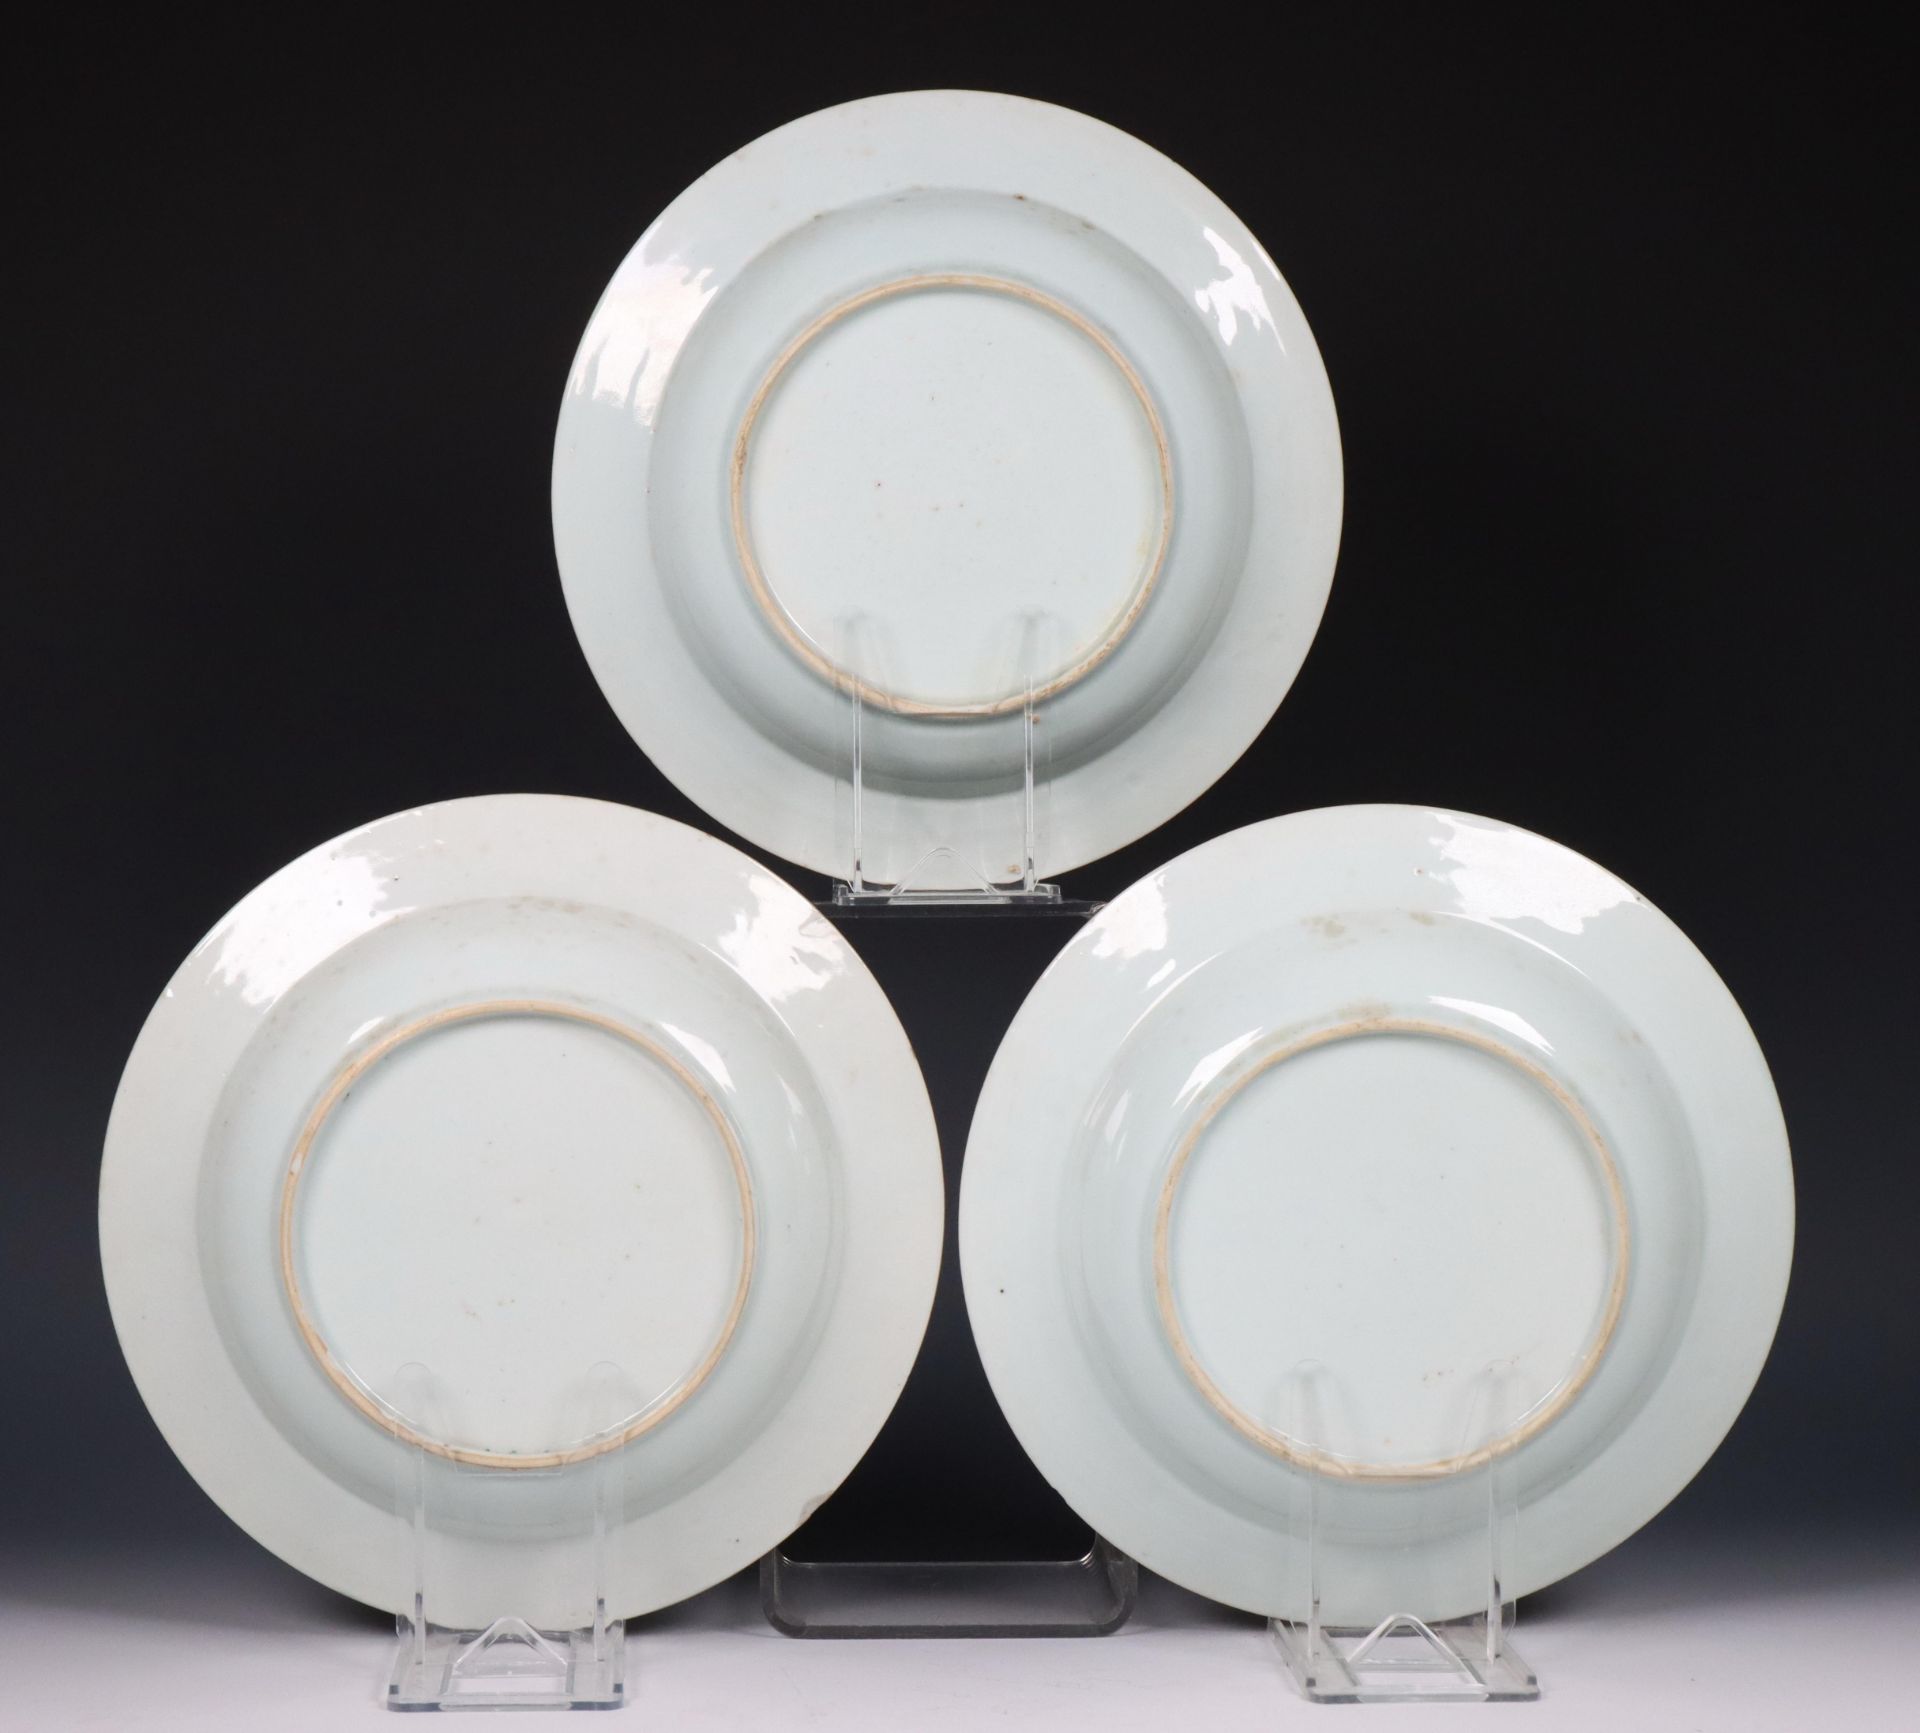 China, set of three famille rose porcelain deep dishes, Qianlong period (1736-1795), - Image 2 of 4